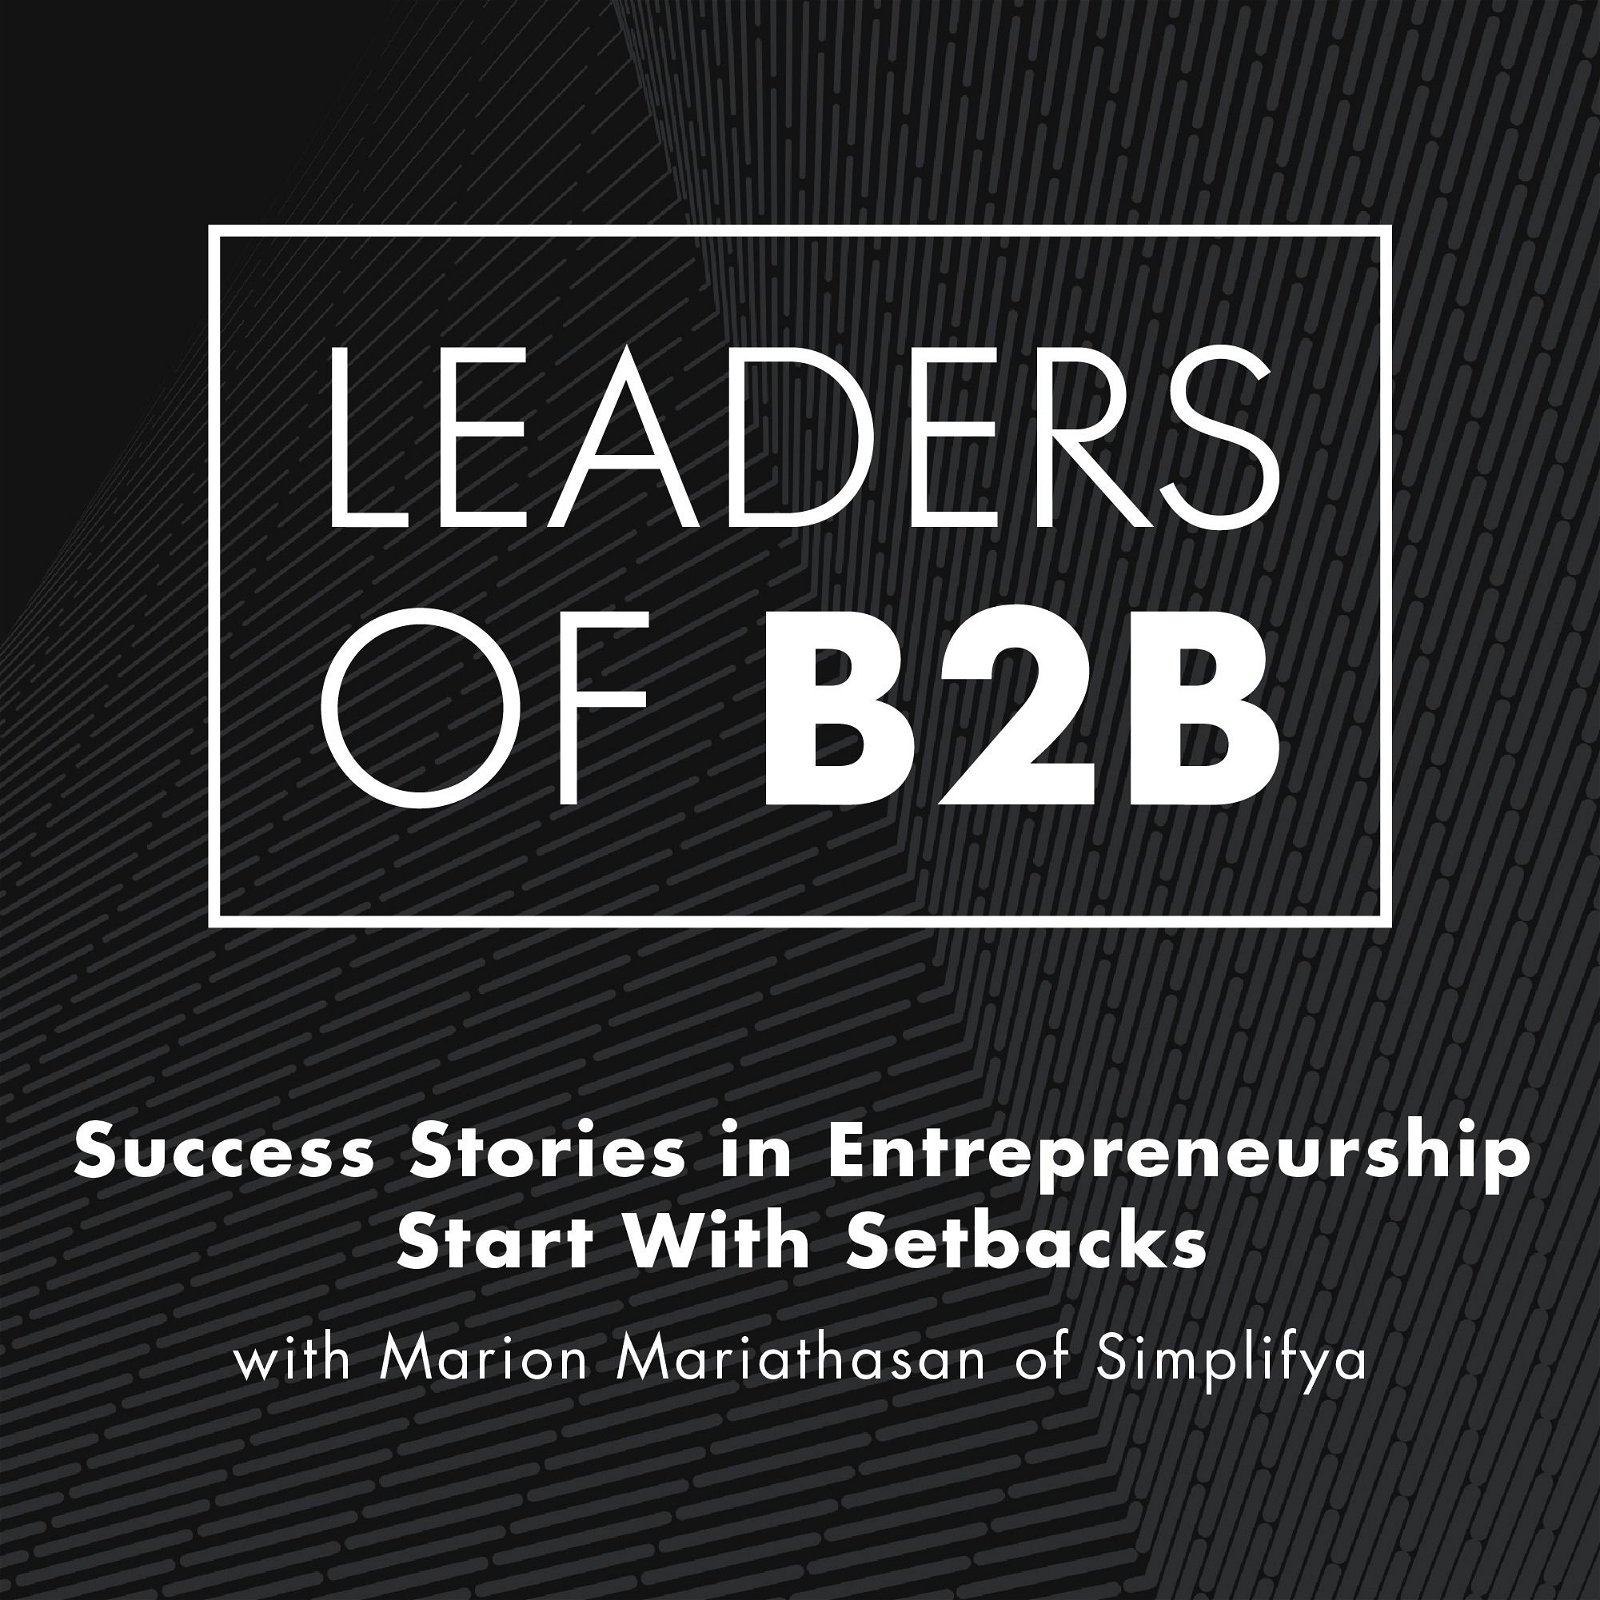 Success Stories in Entrepreneurship Start With Setbacks with Marion Mariathasan of Simplifya